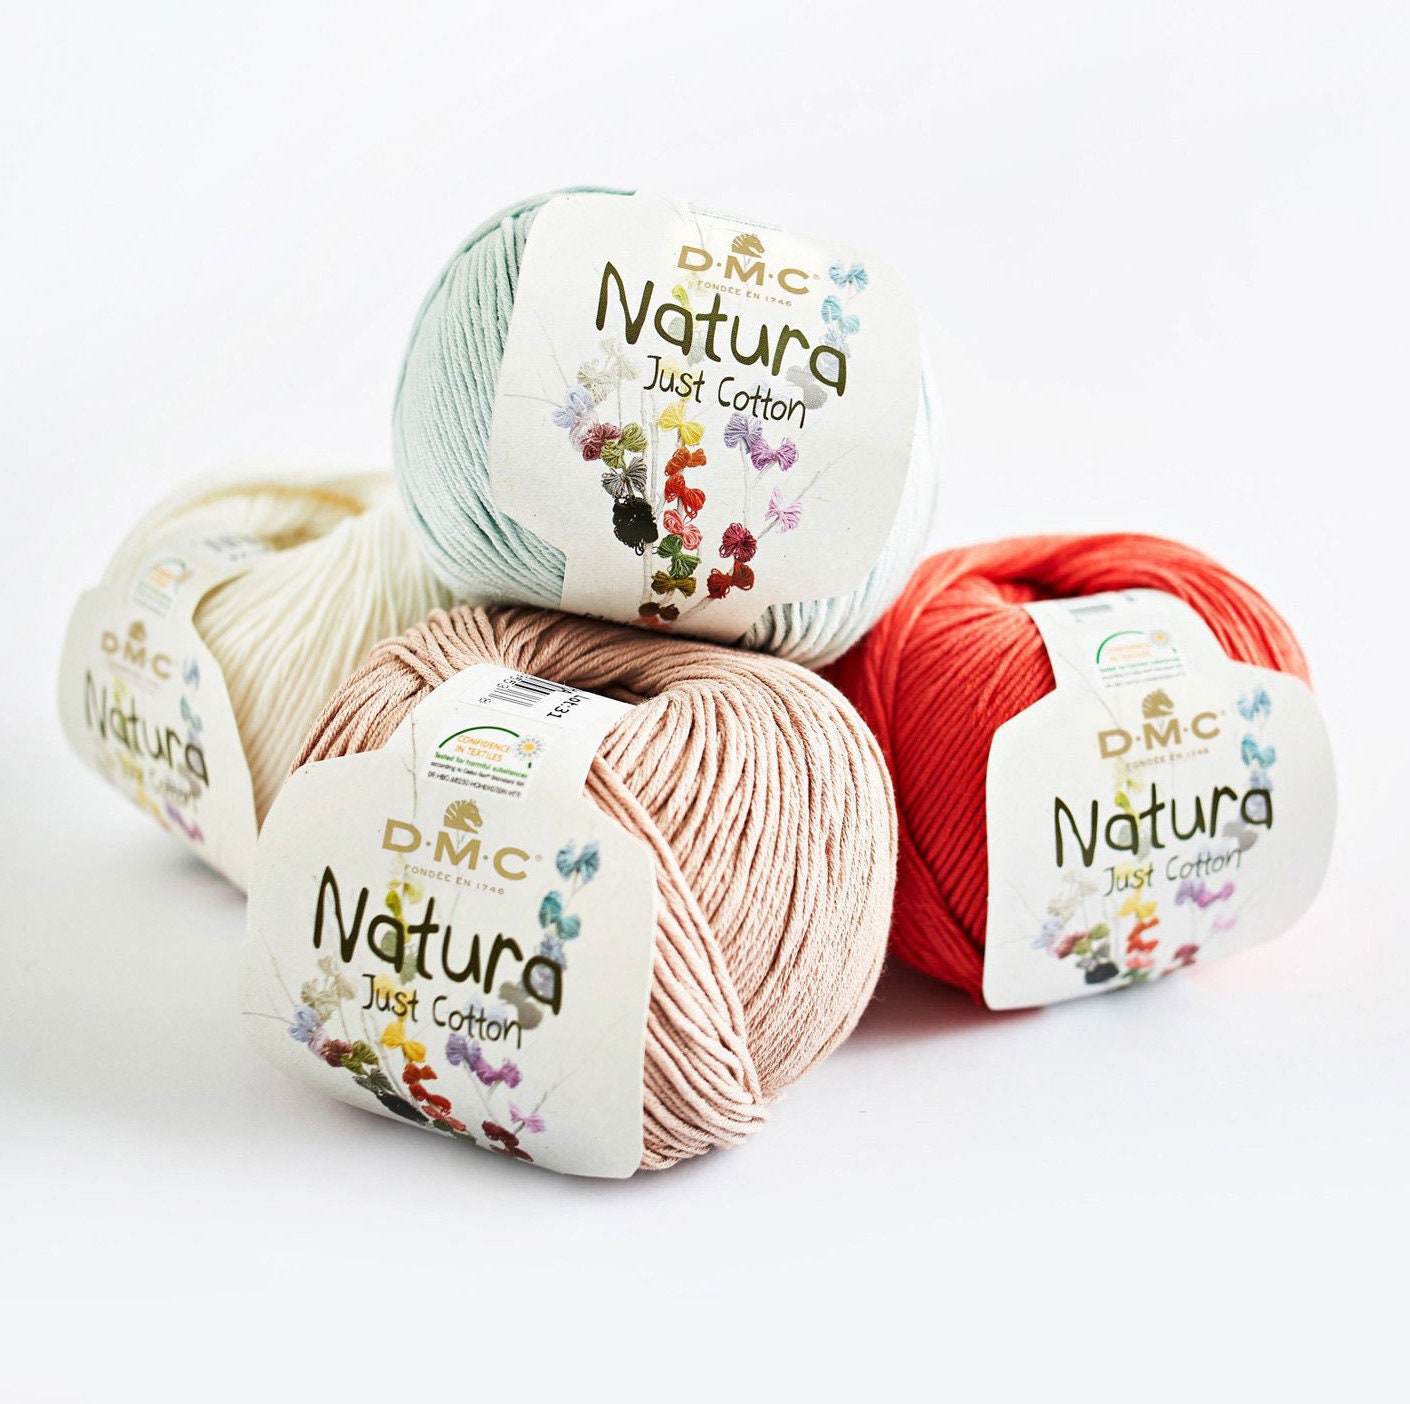 Natura Just Cotton DMC 302 Threads for Knitting and Crochet 100% Cotton 